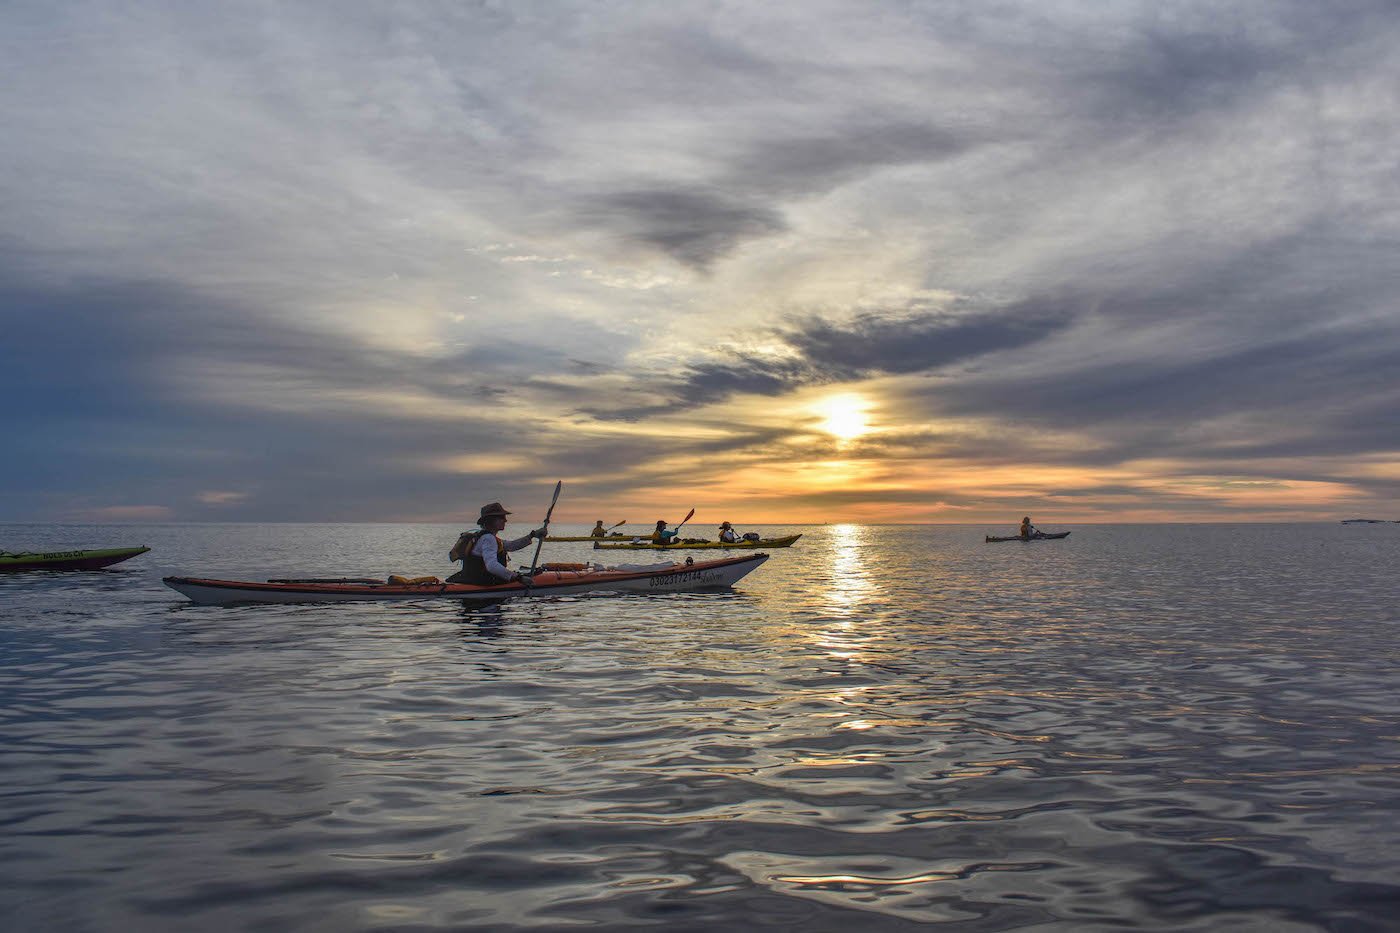 NOLS participants paddle kayaks on smooth gray water as the sun sets into the clouds over the ocean